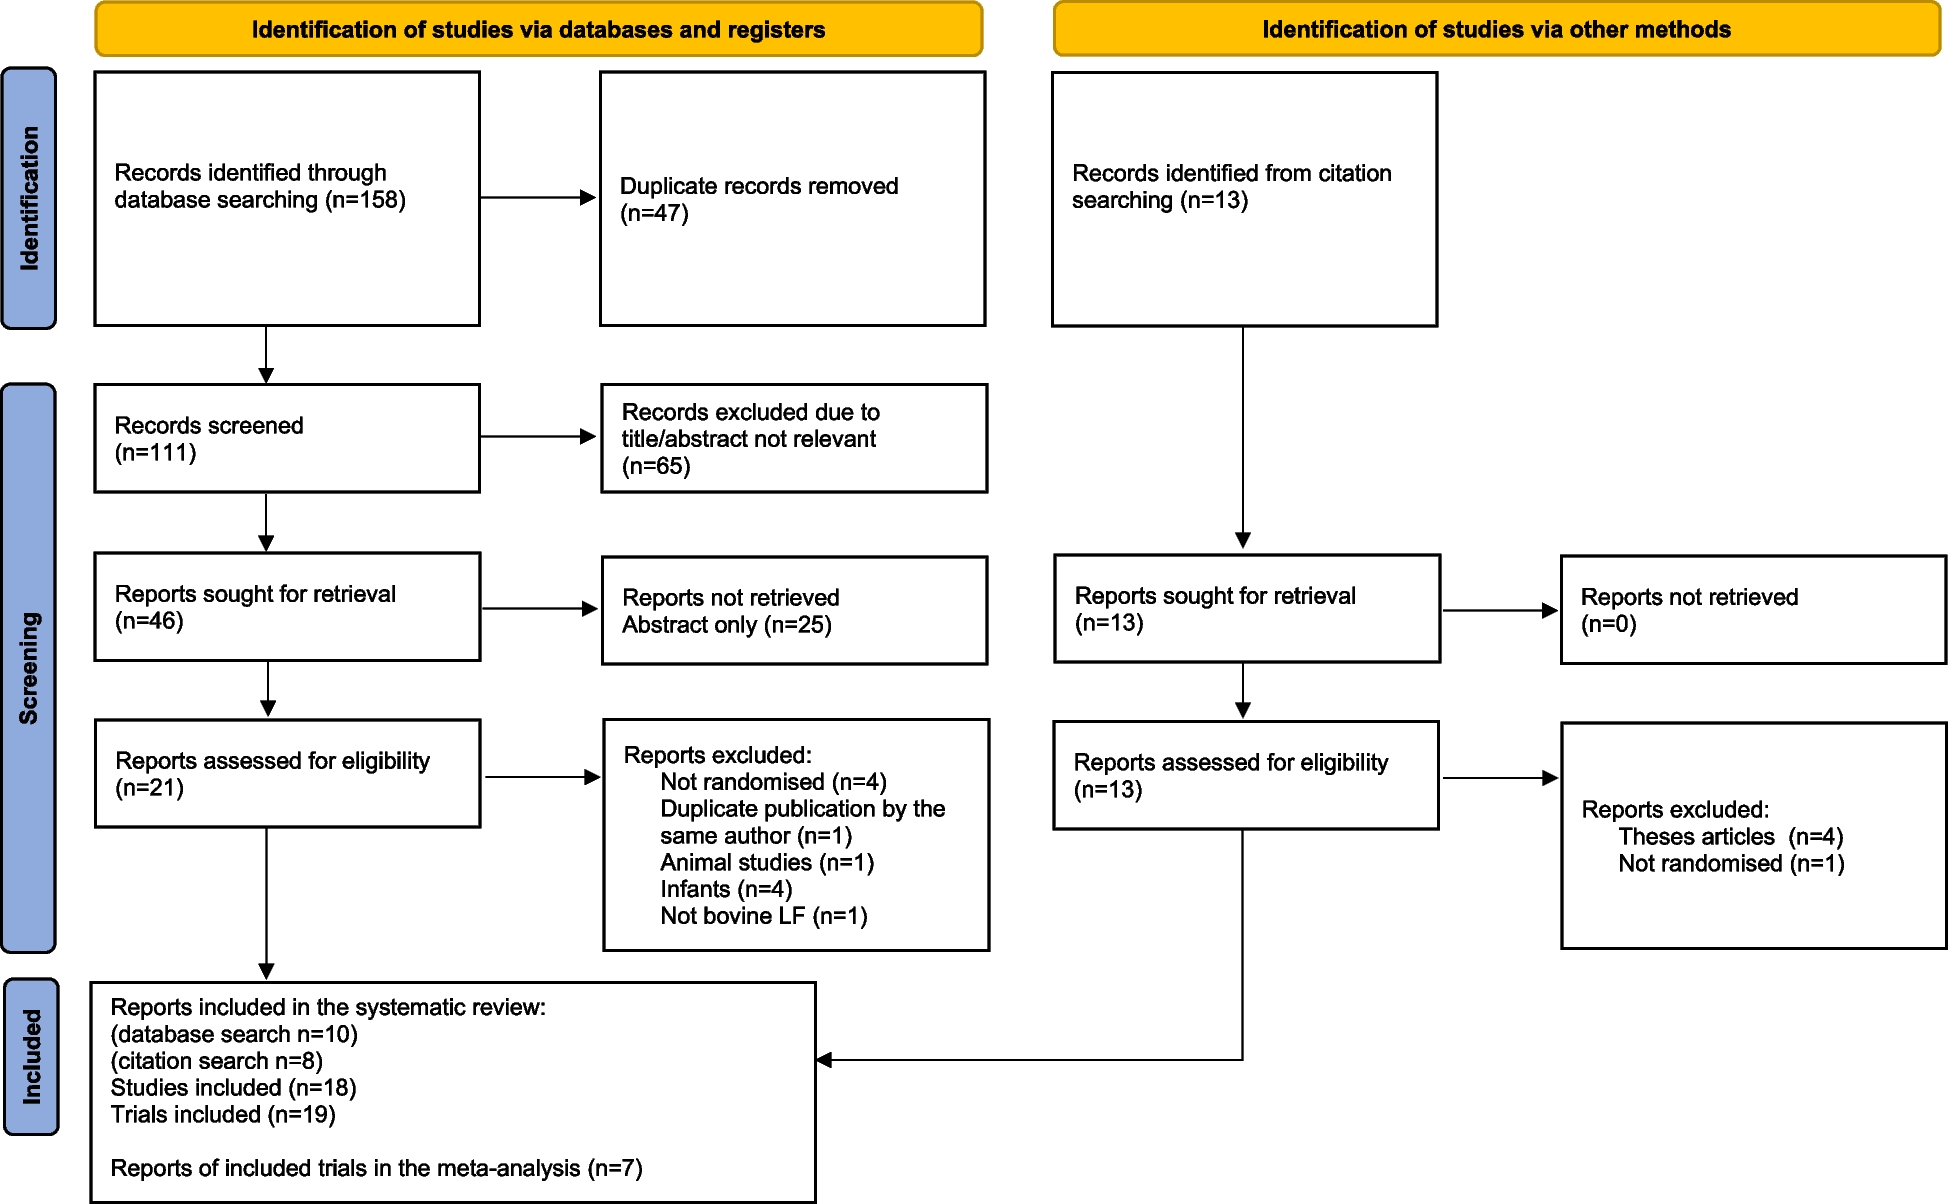 The effectiveness of oral bovine lactoferrin compared to iron supplementation in patients with a low hemoglobin profile: A systematic review and meta-analysis of randomized clinical trials